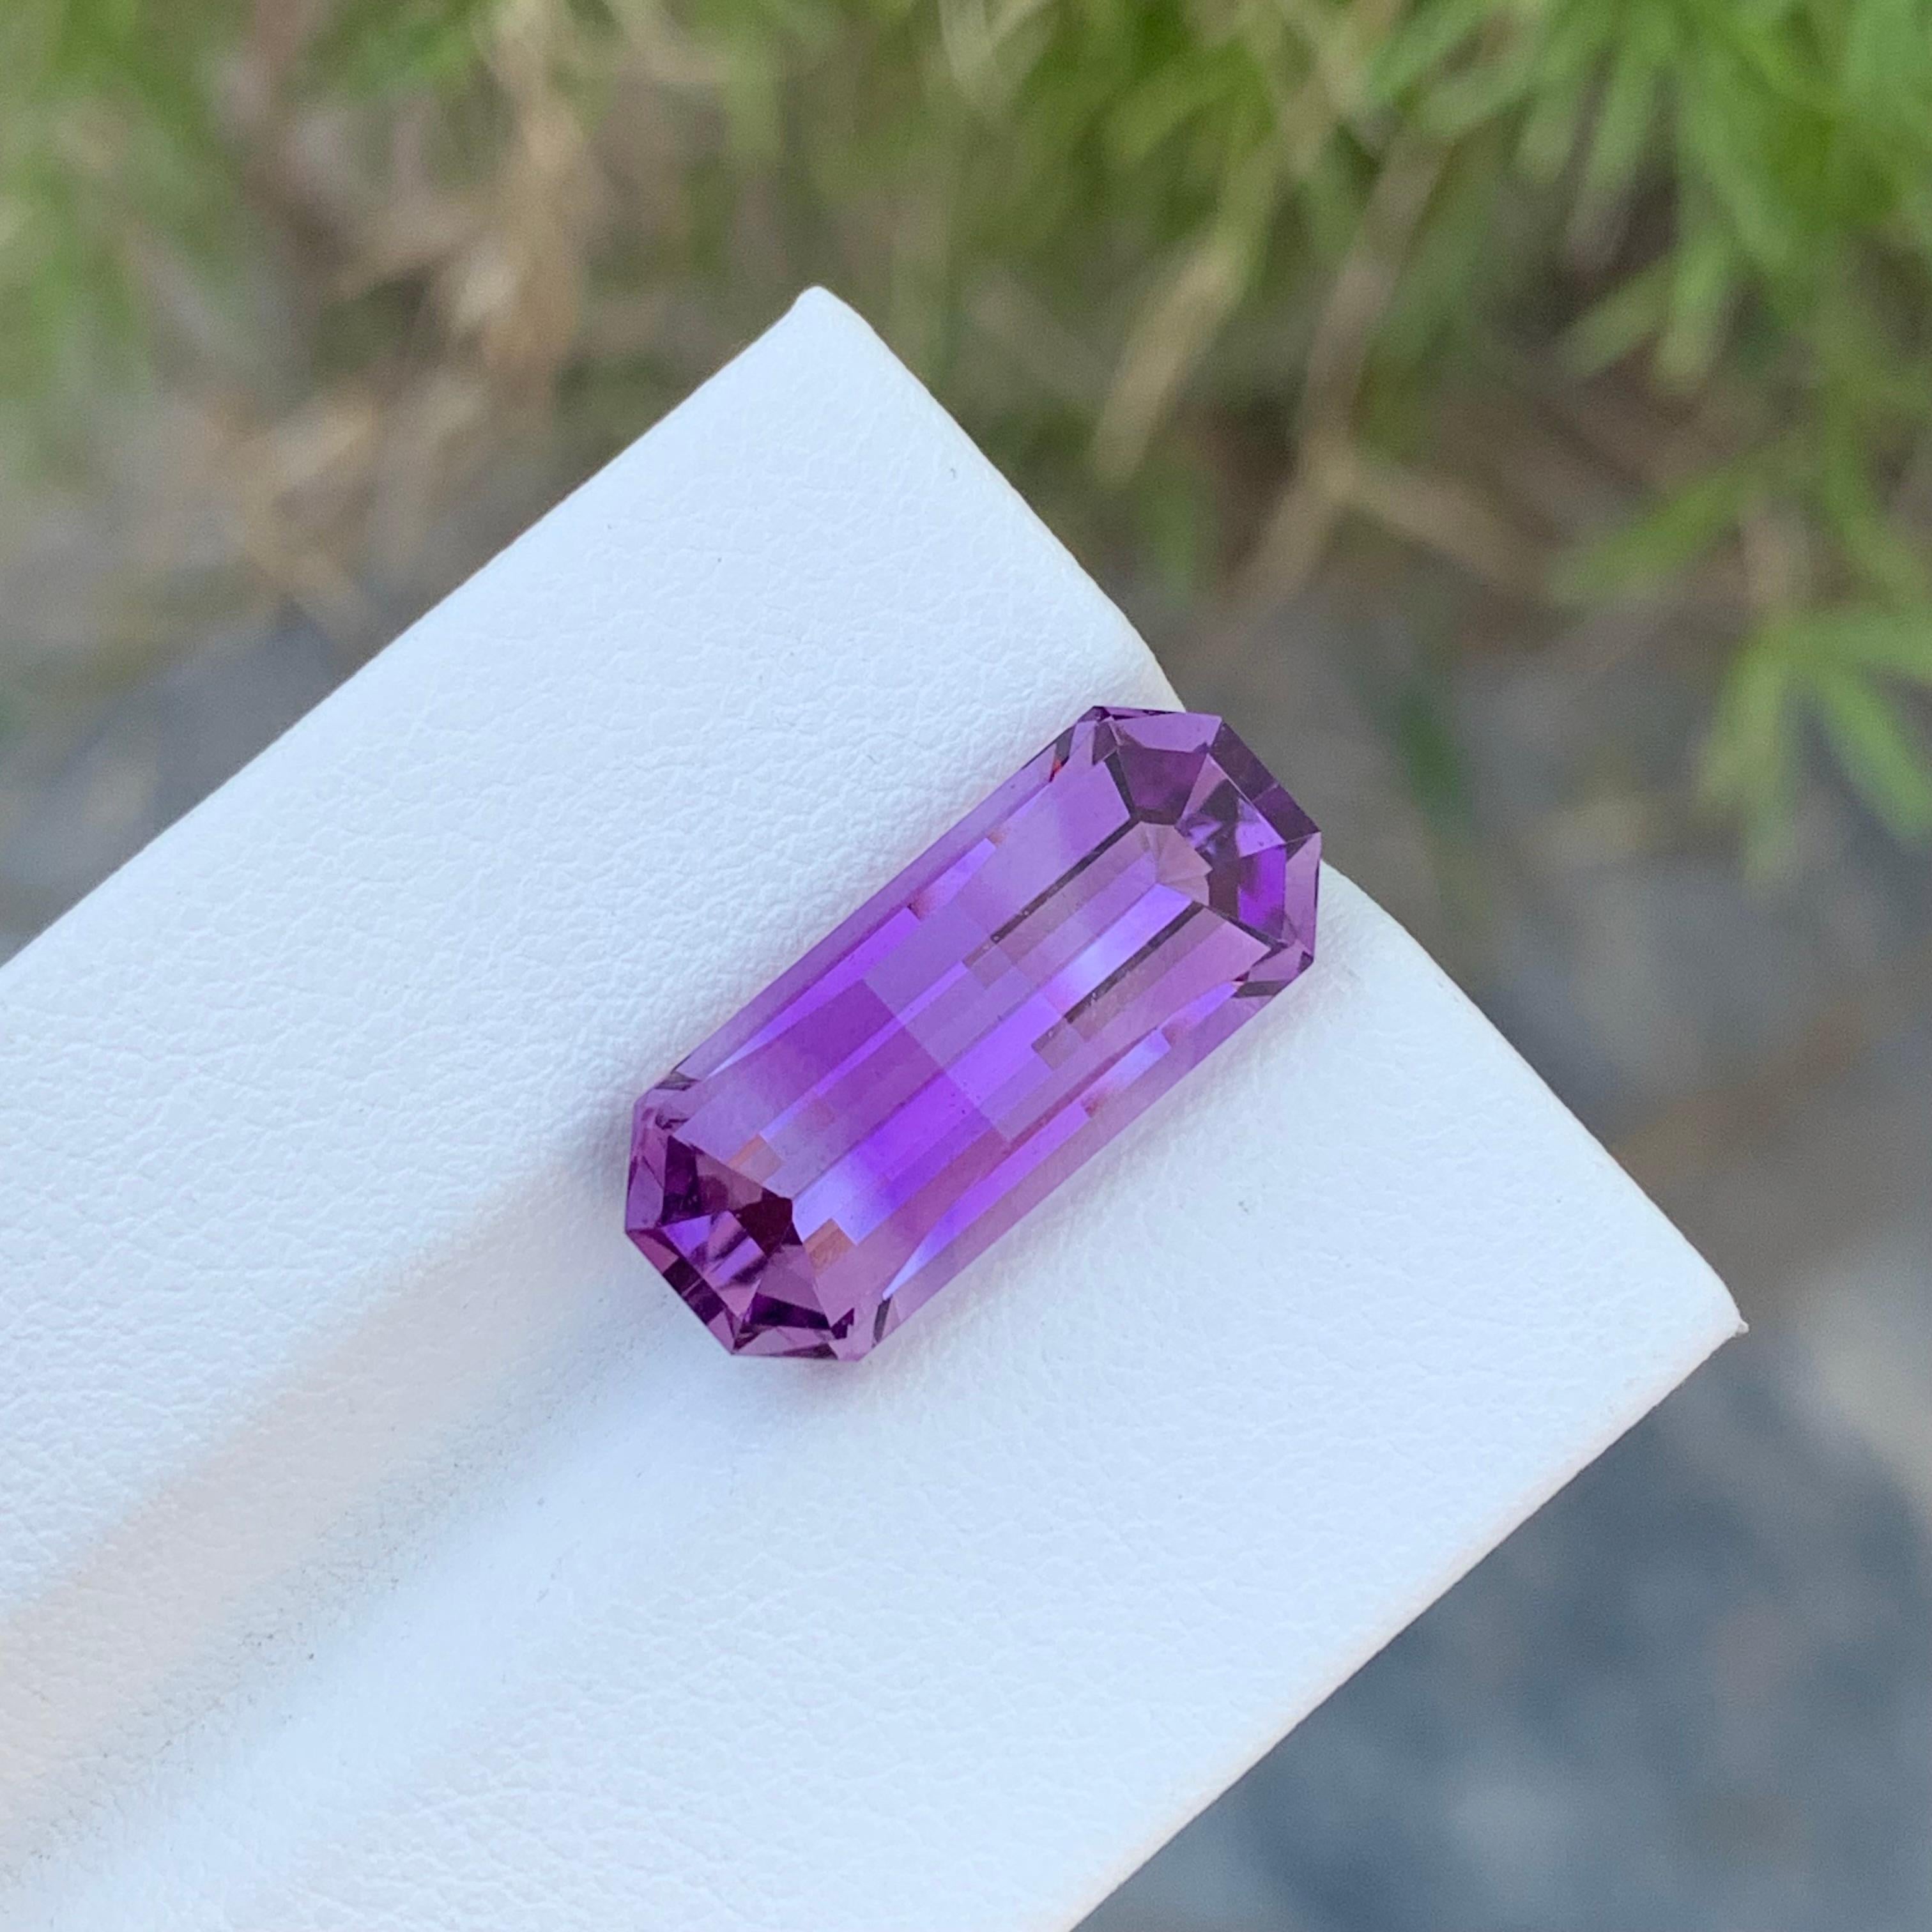 Loose Amethyst
Weight: 8.30 Carats
Dimension: 18.9 x 8.1 x 7.5 Mm
Colour: Purple
Origin: Brazil
Treatment: Non
Certificate: On Demand
Shape: Emerald

Amethyst, a stunning variety of quartz known for its mesmerizing purple hue, has captivated humans